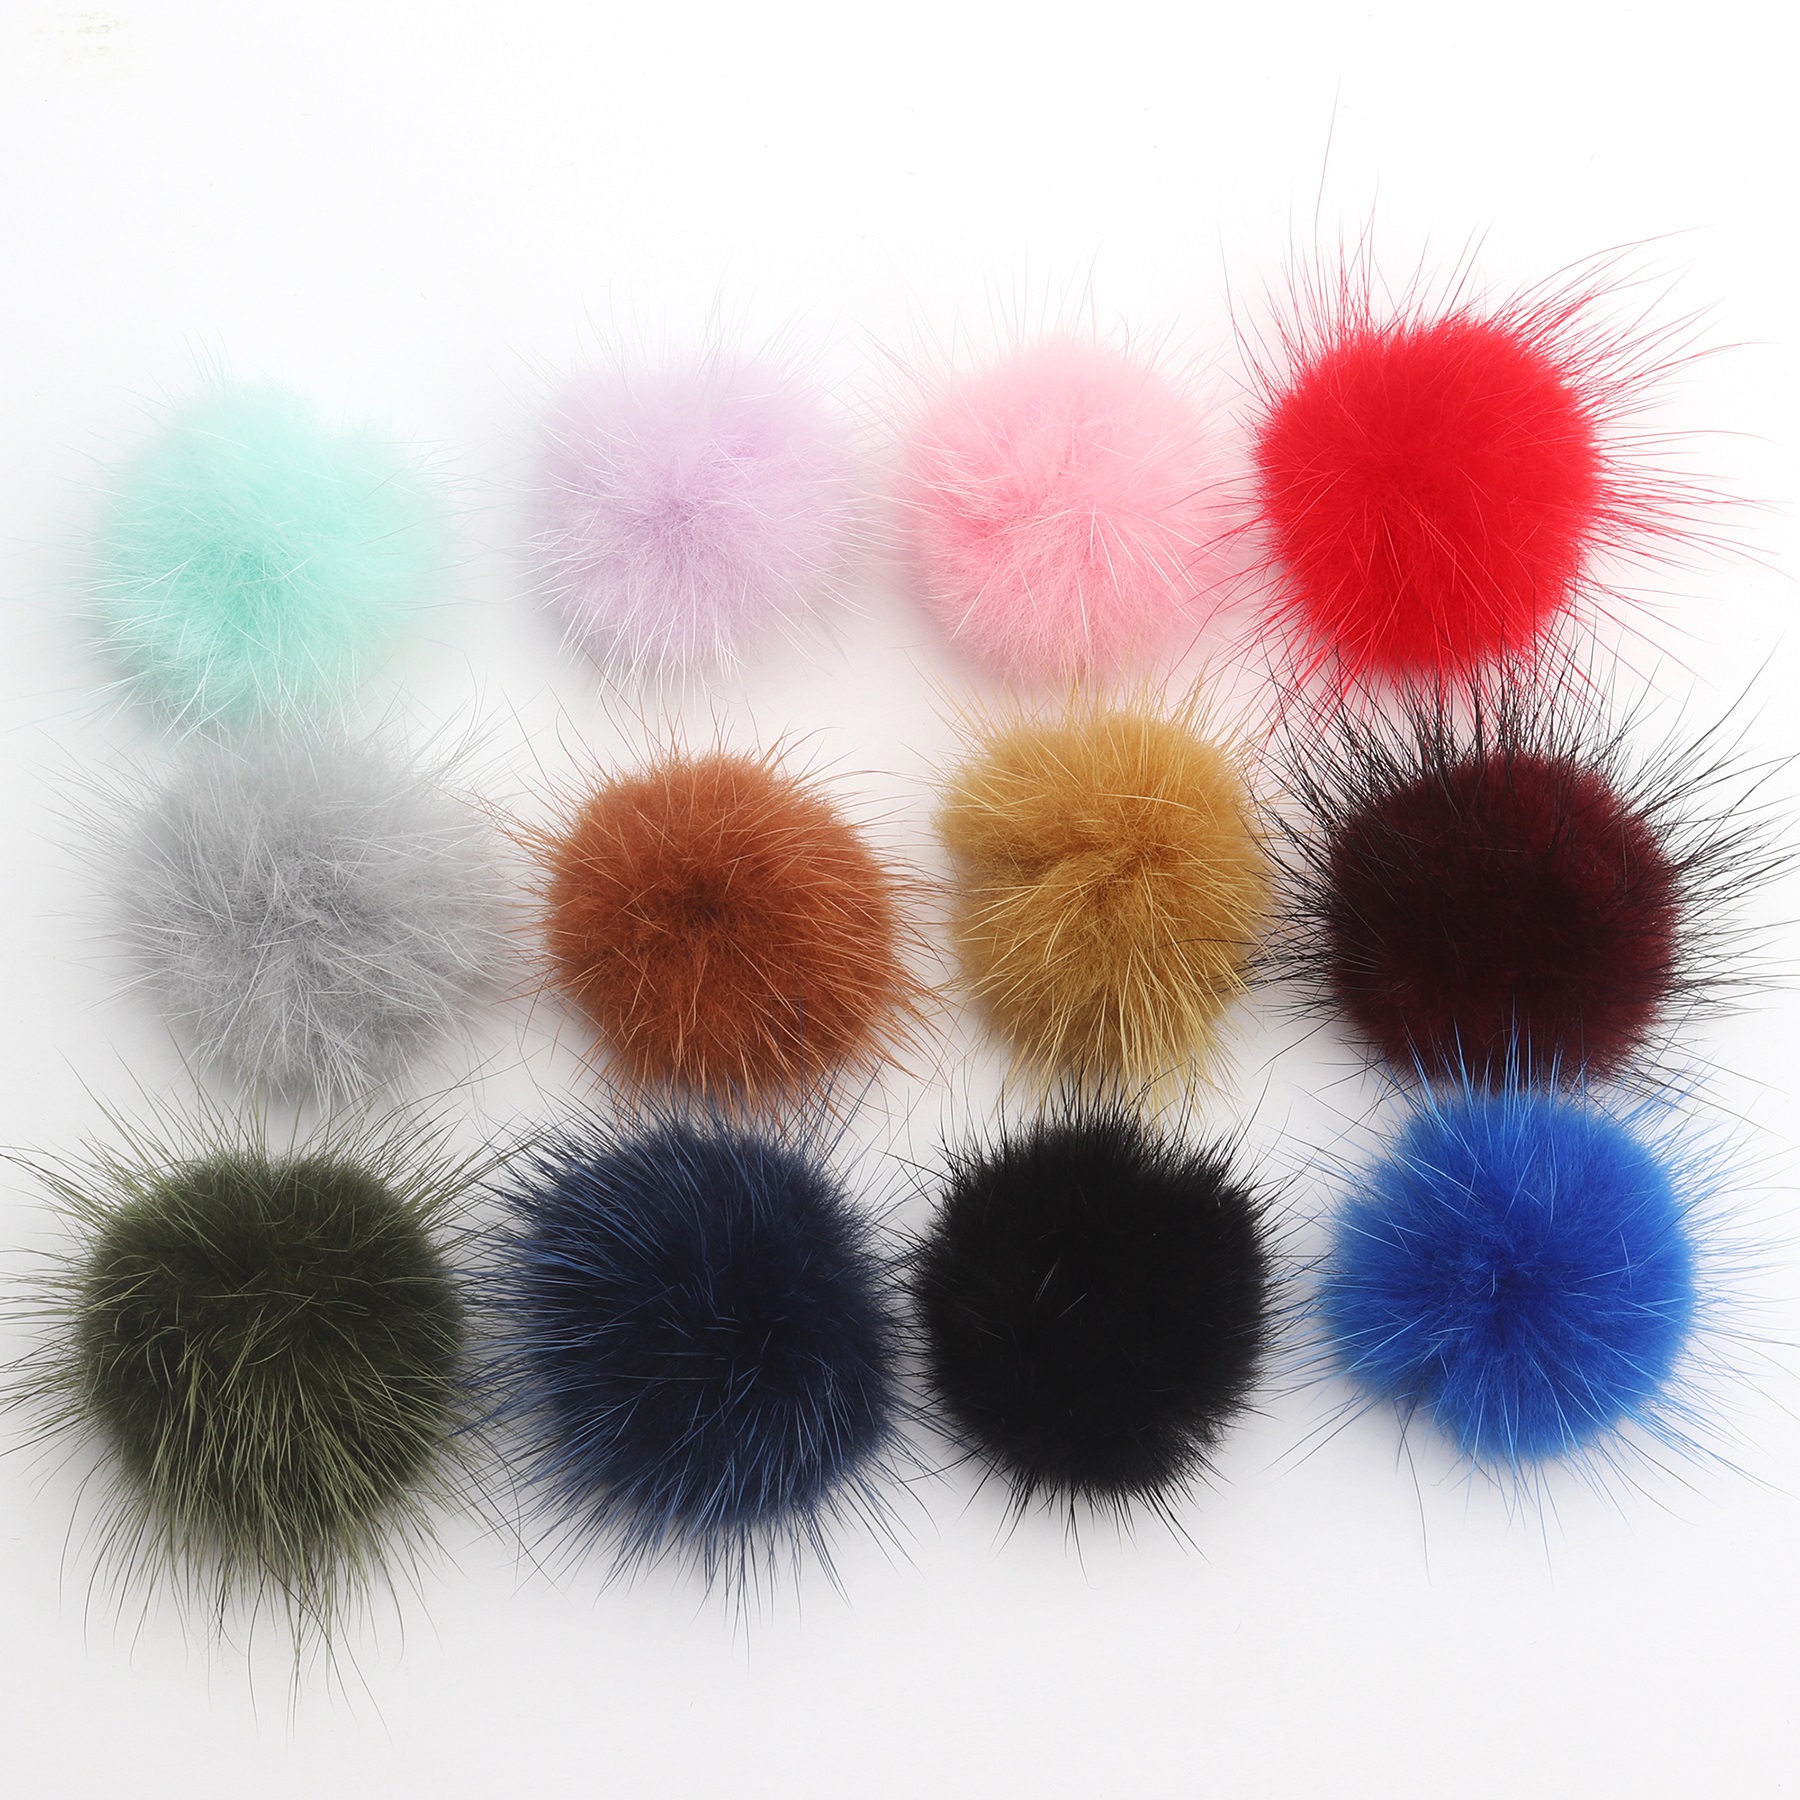 GUFEATHER L201,tassels,fur tassel,hand made,jewelry findings components,jewelry making,diy earring,jewelry accessories,10pcs/lot